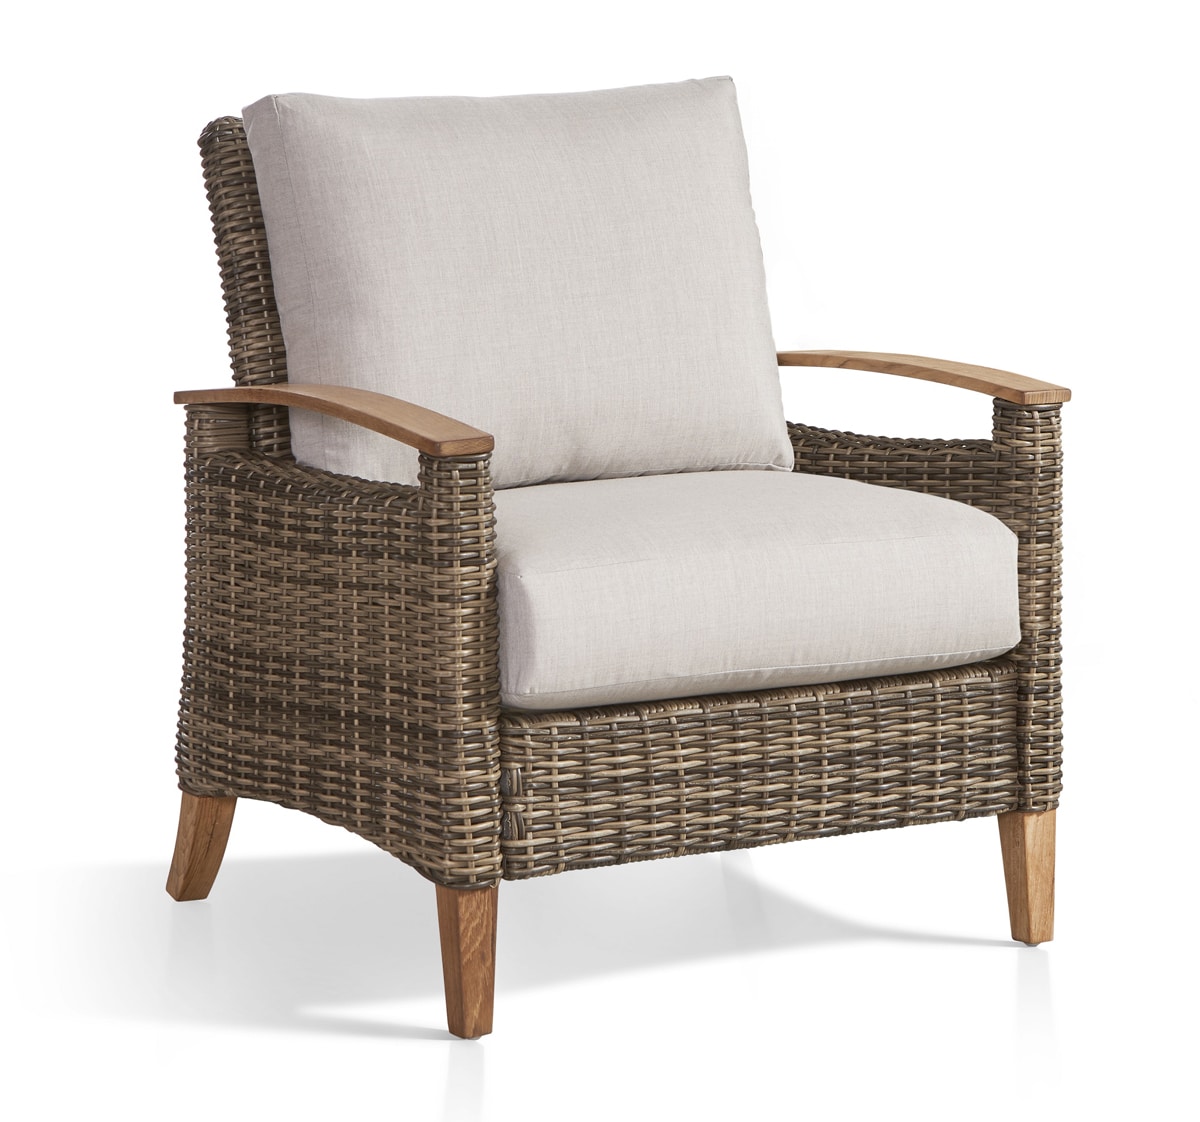 Payton Outdoor Lounge Chair Model 72101 By South Sea Rattan